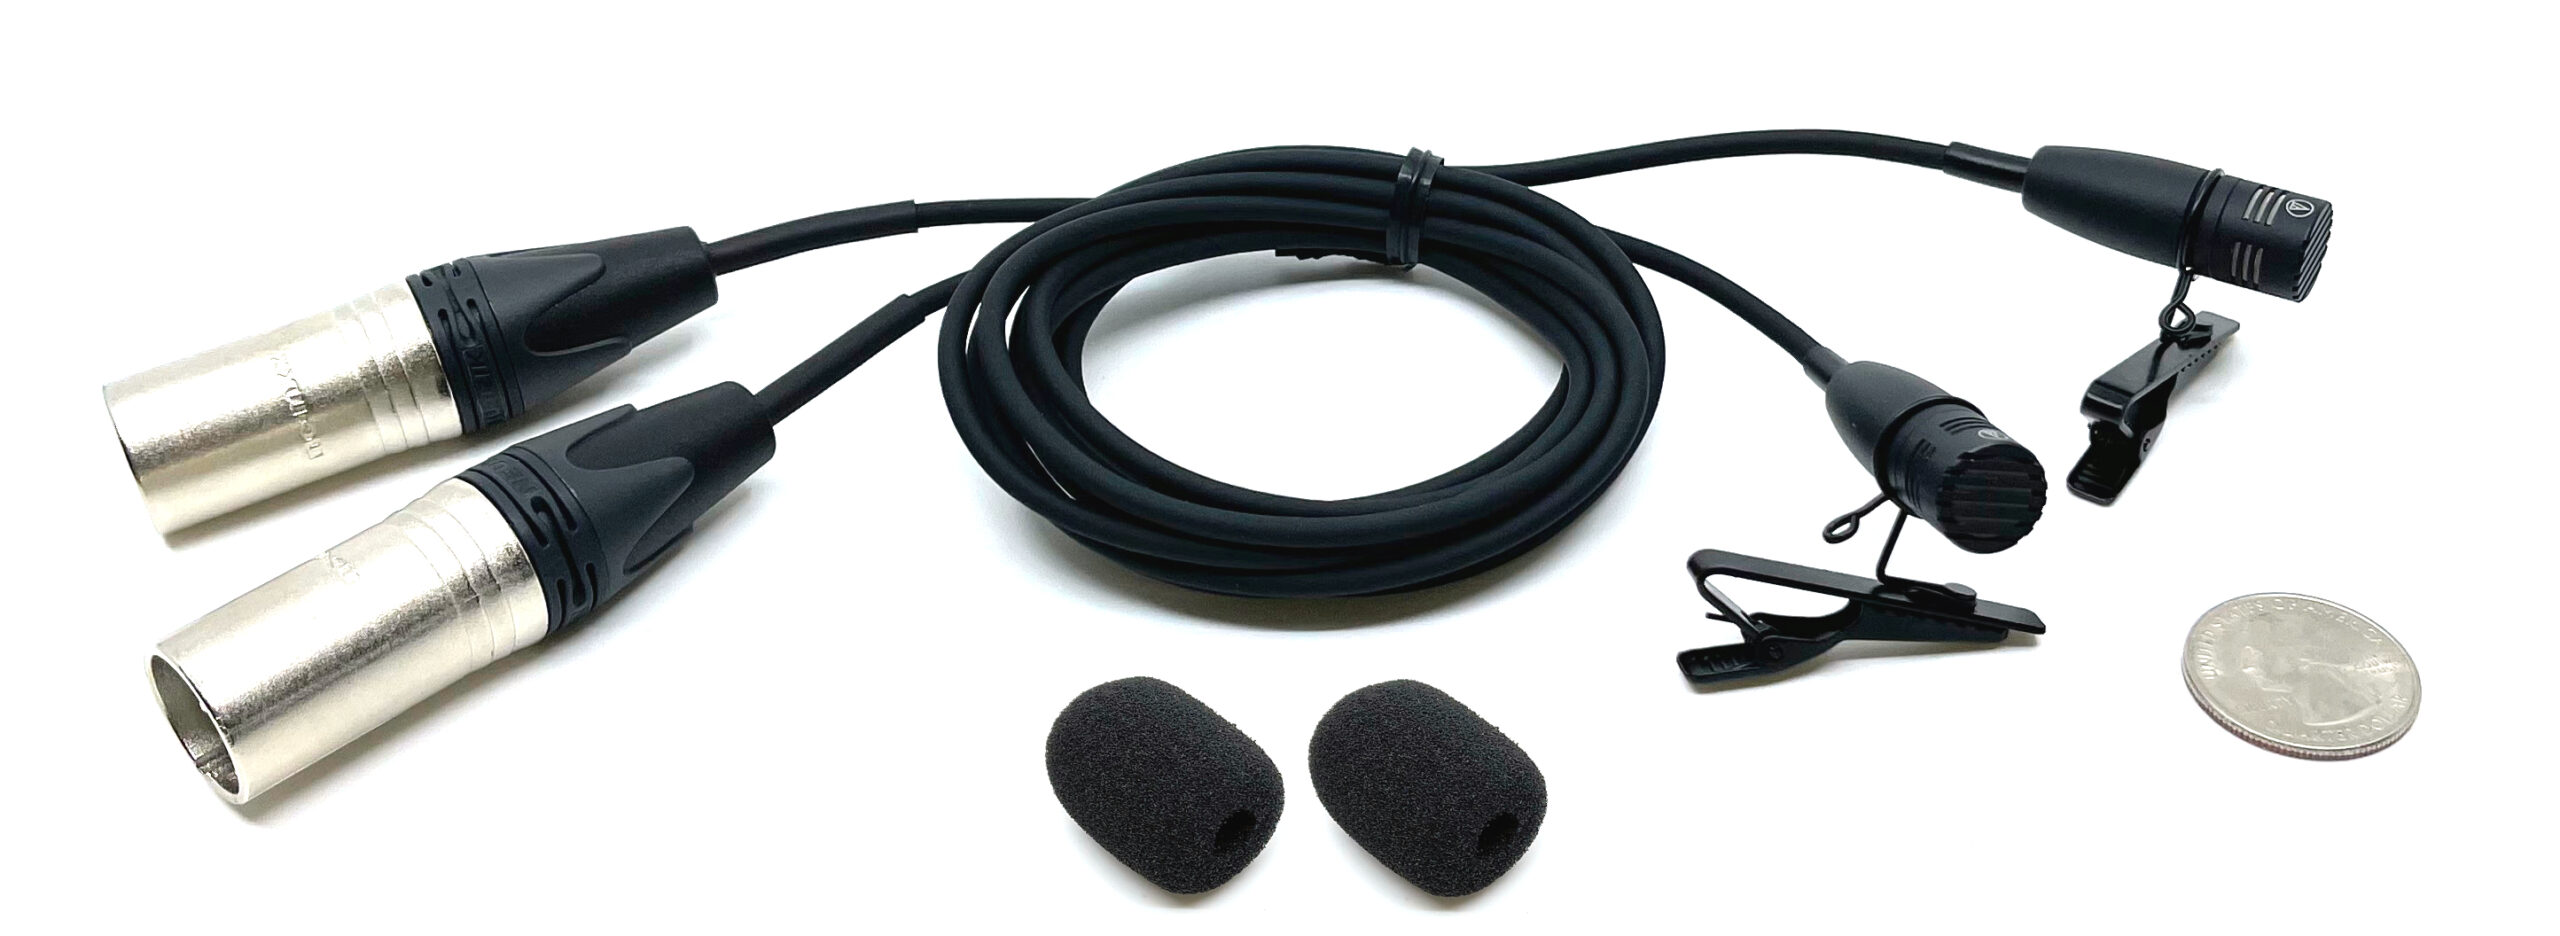 SP-CMC-4U-PHANTOM - Cardioid stereo microphones with XLR connectors - Includes one pair of rotating clips and standard windscreens Questions & Answers